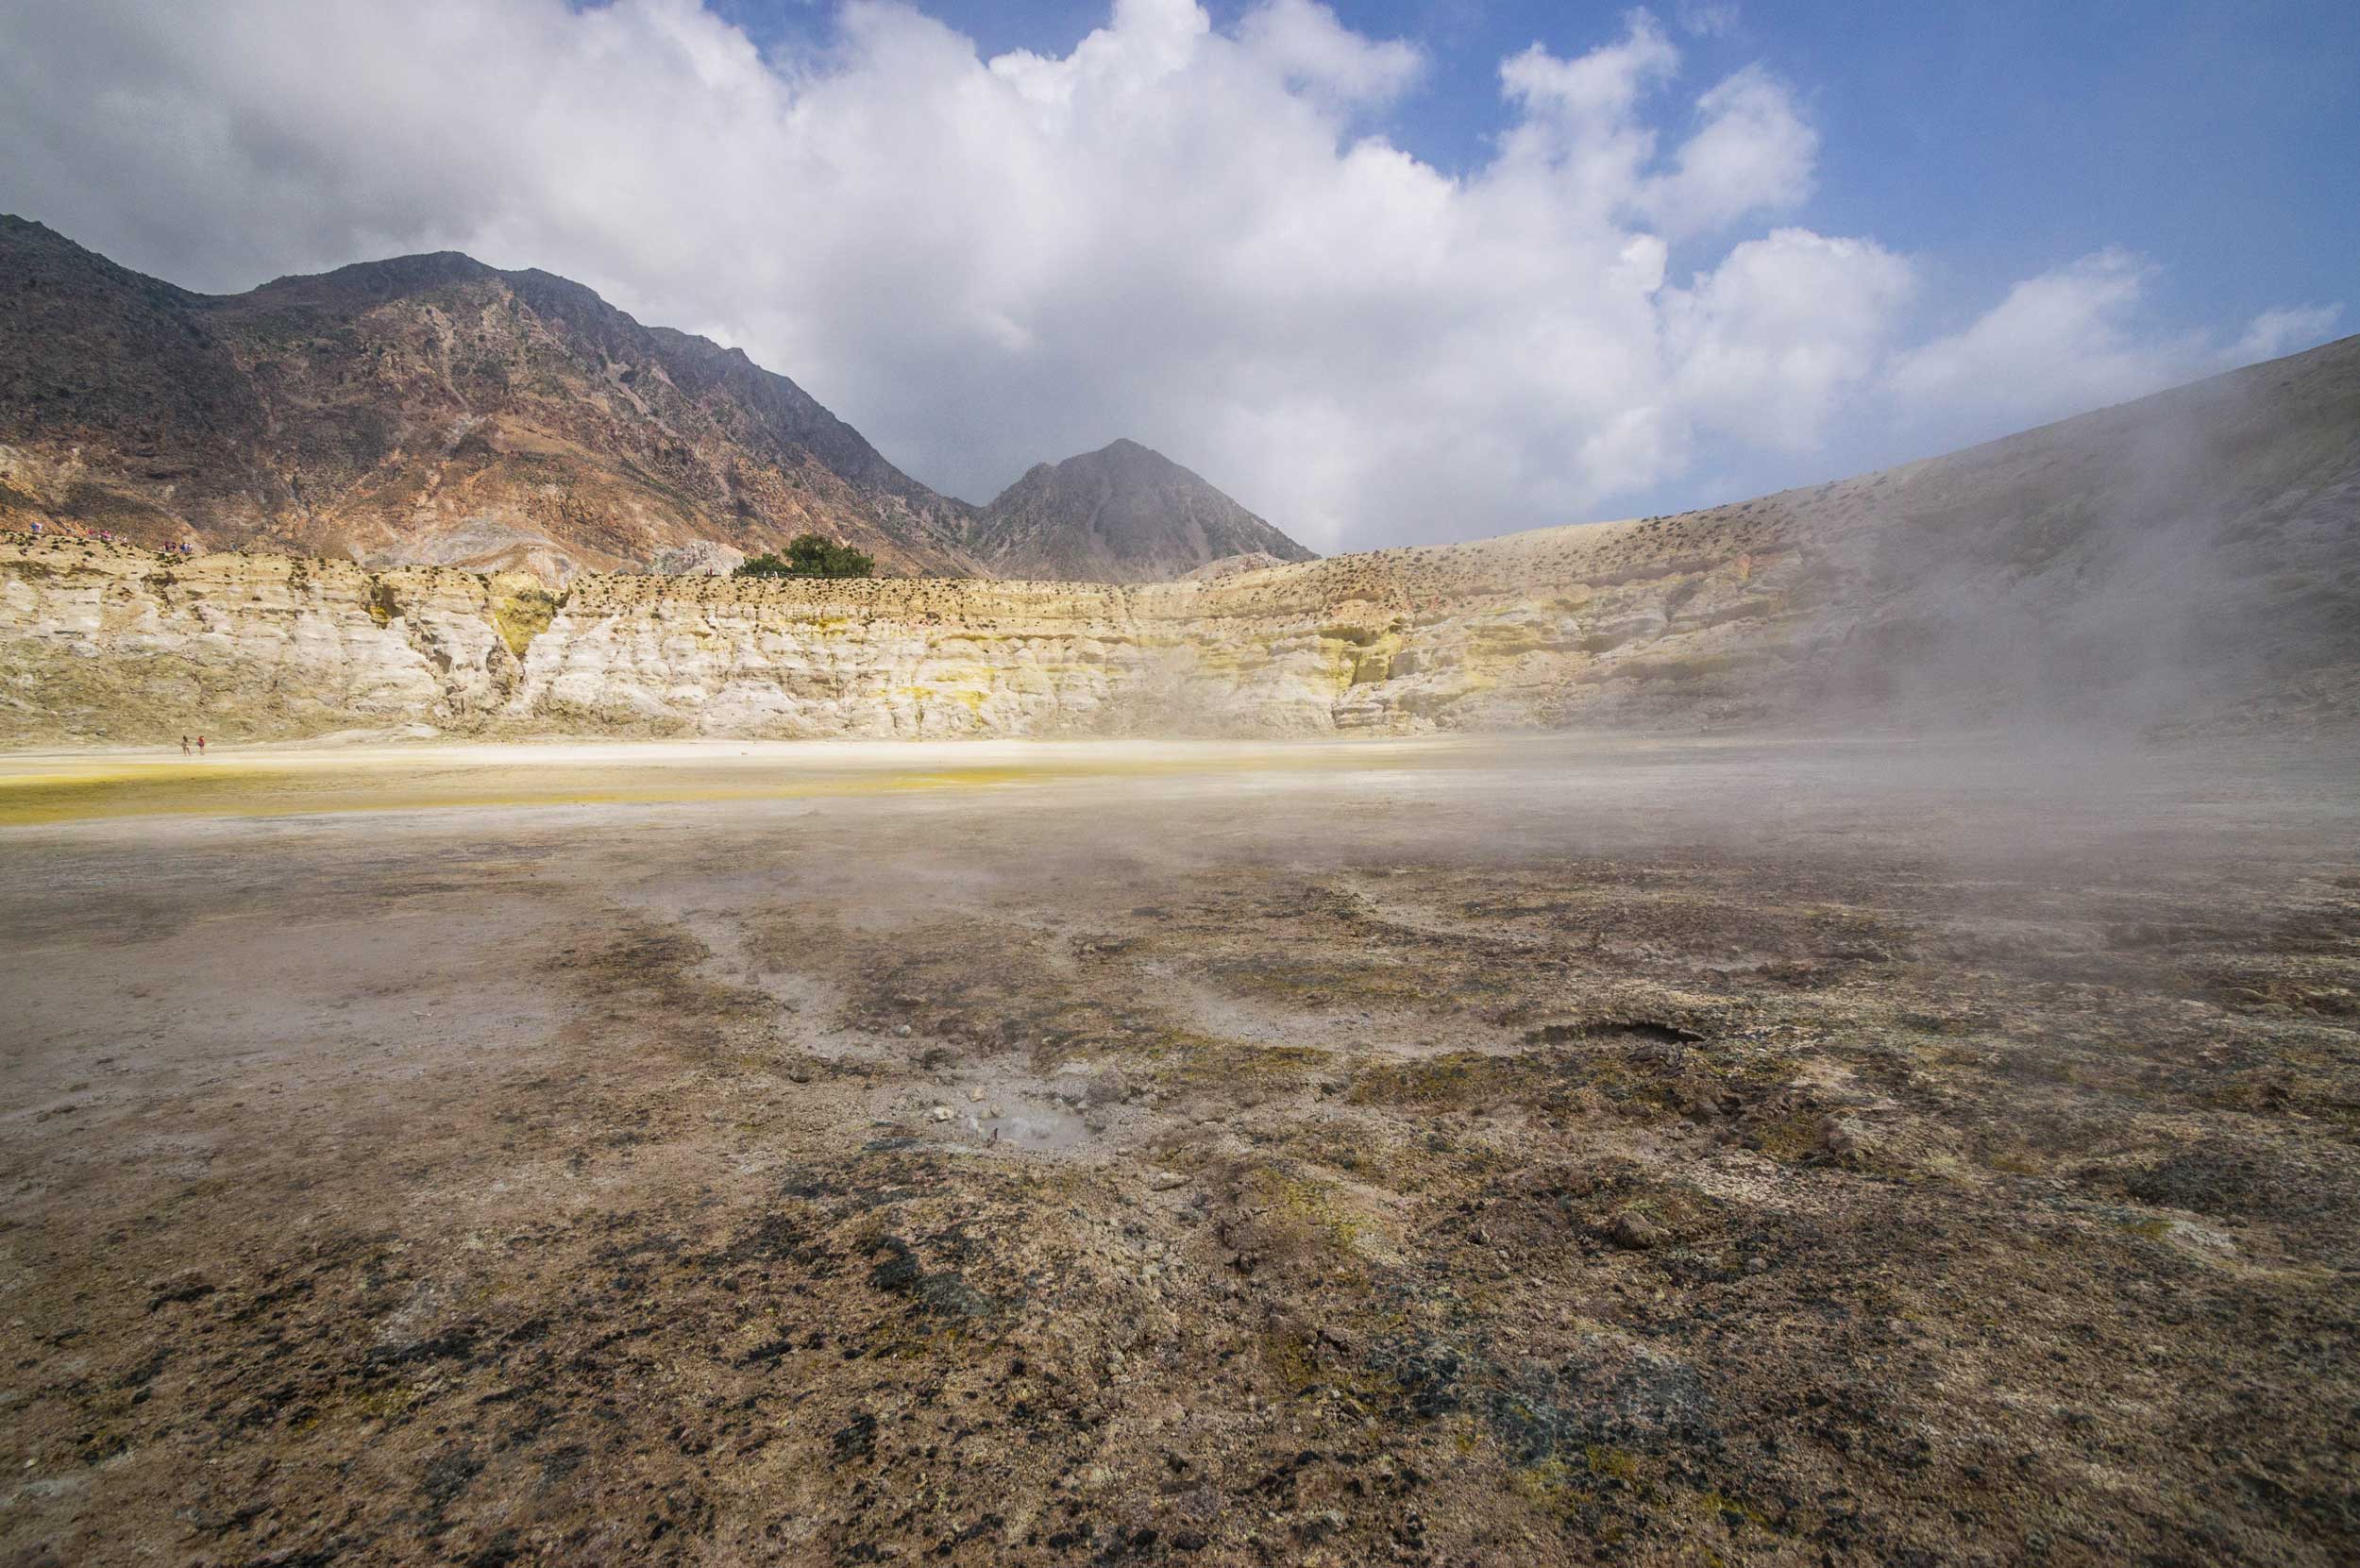 Vapour rising from a flat, yellow sulphurous crater, Greece